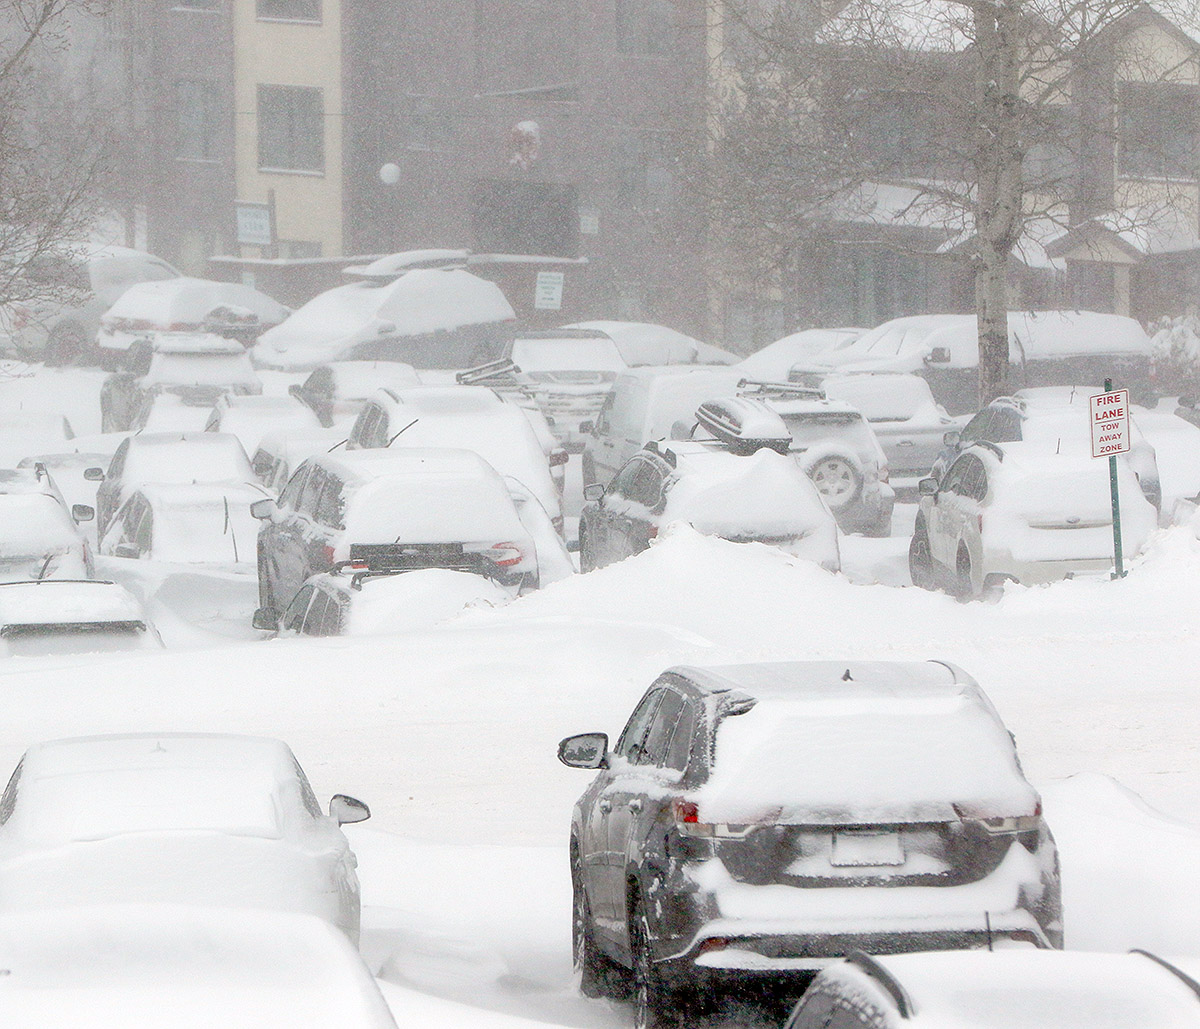 An image of the parking lots containing cars covered with snow during Winter Storm Quinlan at Bolton Valley Ski Resort in Vermont